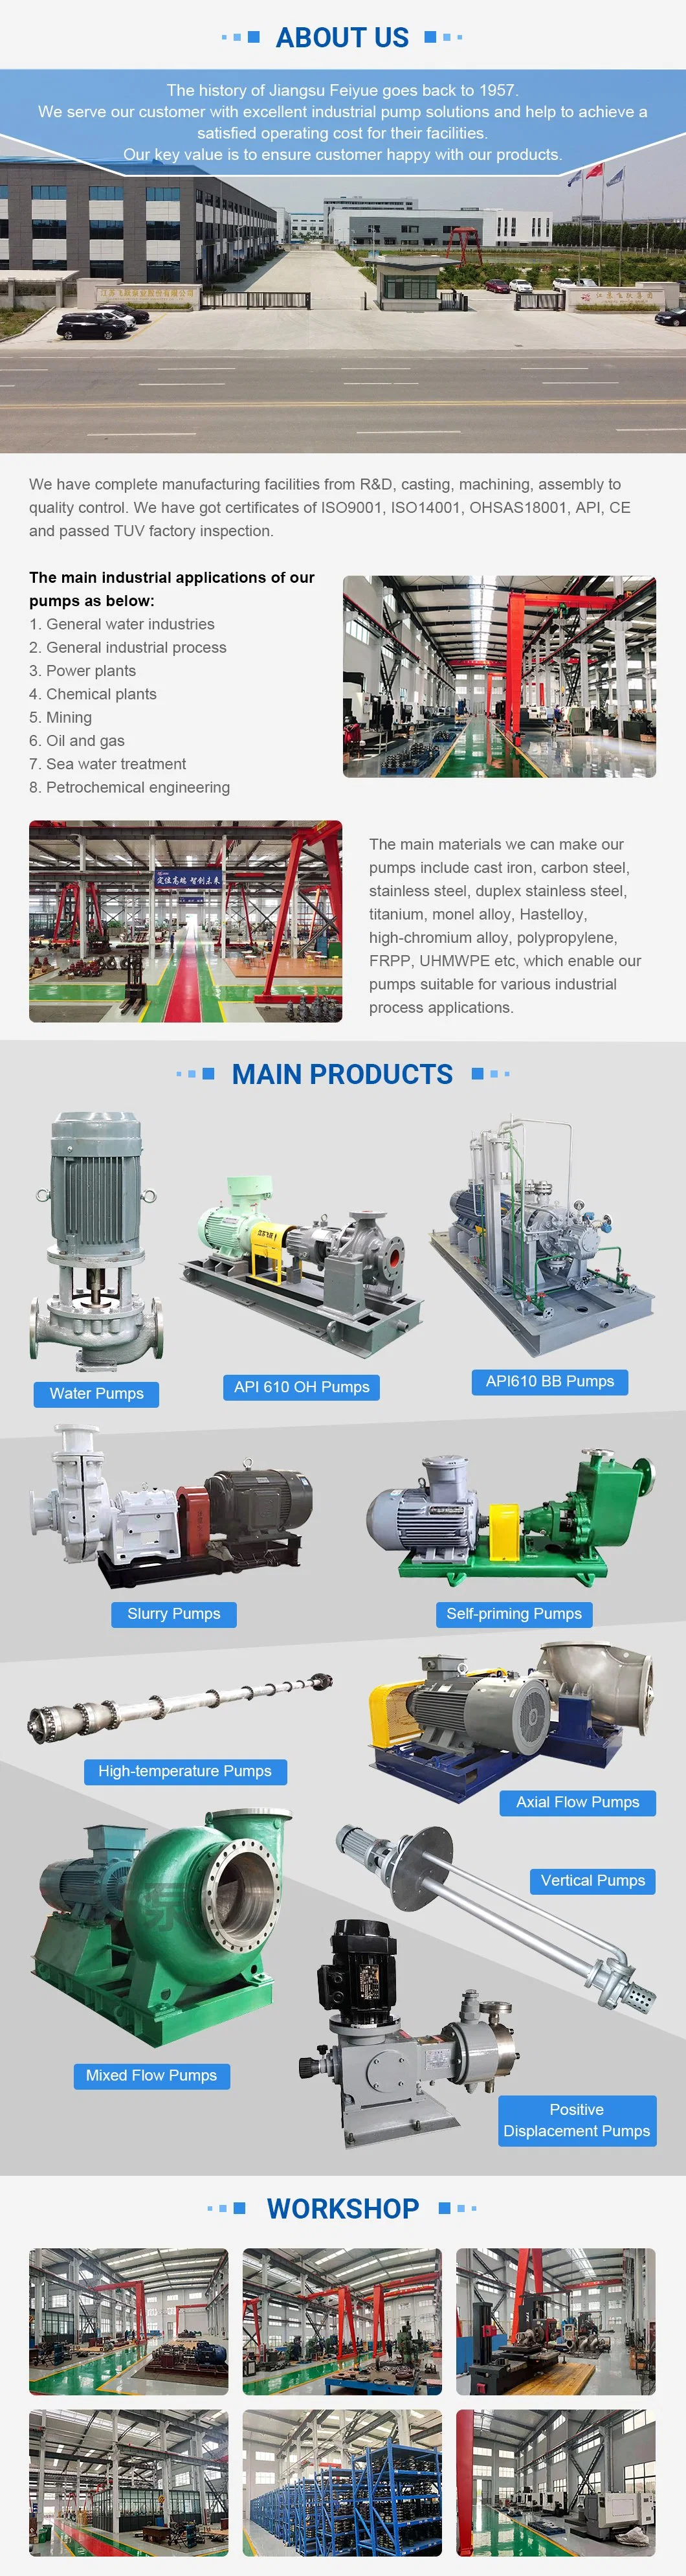 Fcdl Centrifugal Pump for Submerged Conveying of Water, Sewage Water and Corrosive Industrial Wastewater